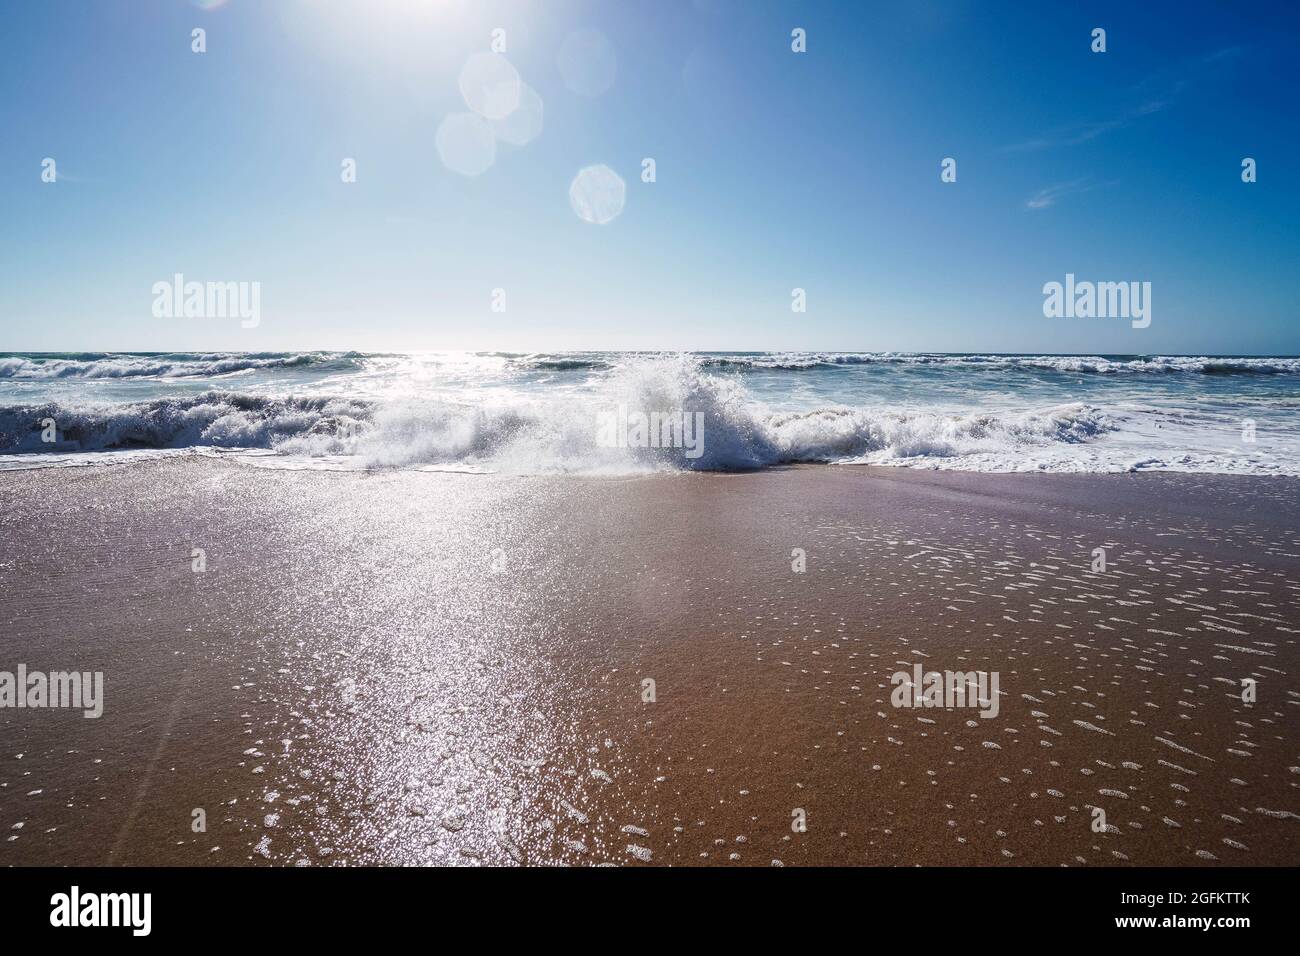 waves breaking on the shore of the beach with foam Stock Photo